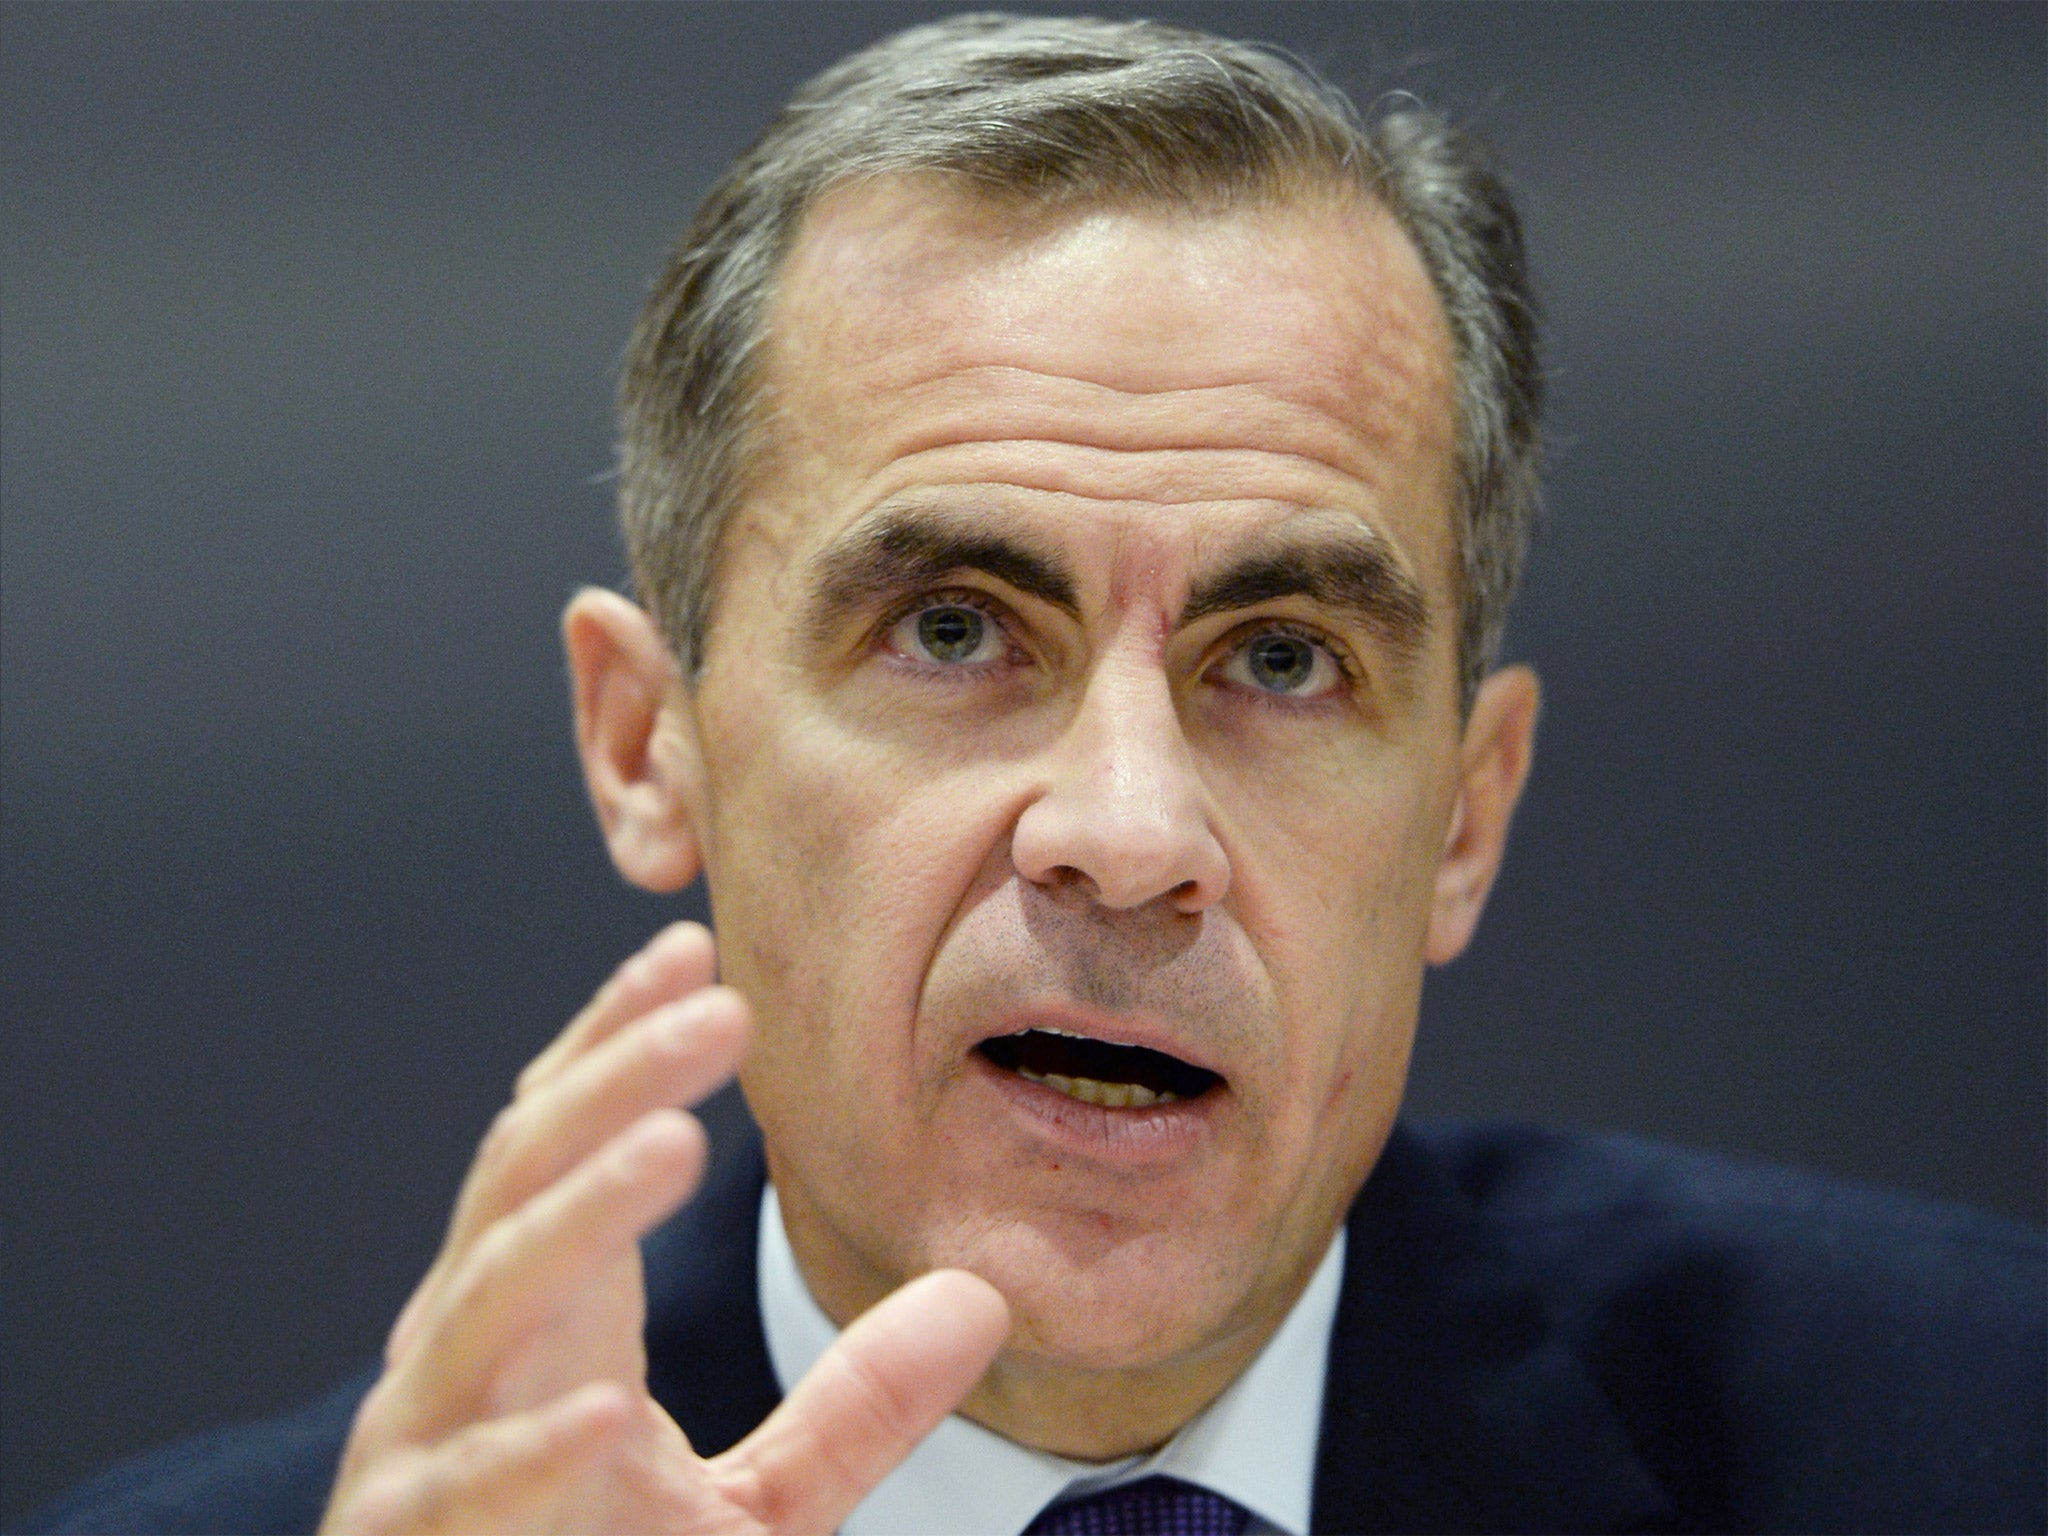 Mark Carney: wary of being a cheerleader for the In campaign